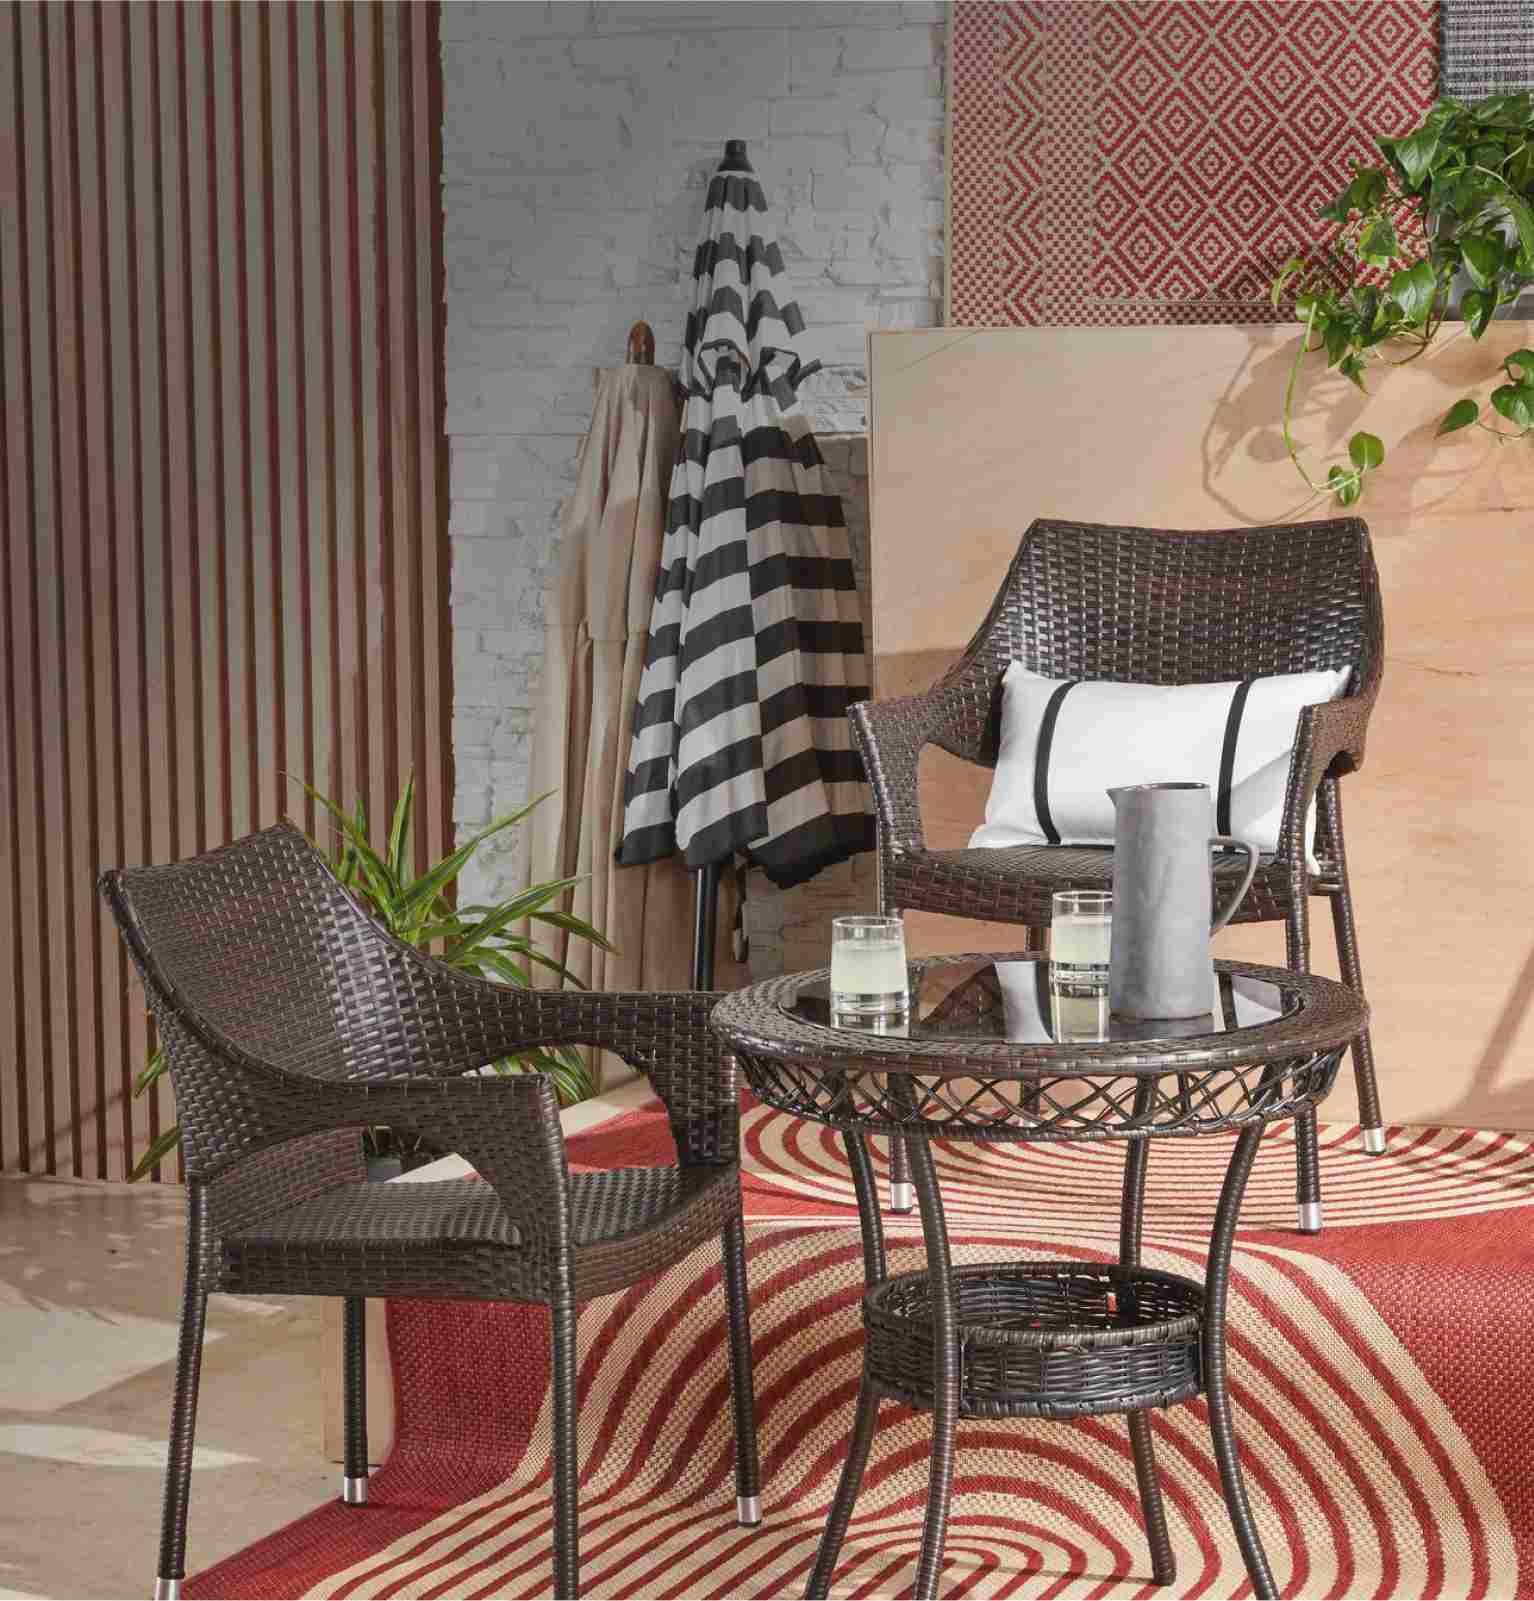 A showcase of outdoor furniture and decor with a large aluminum rocking chair and side tables available at Overstock